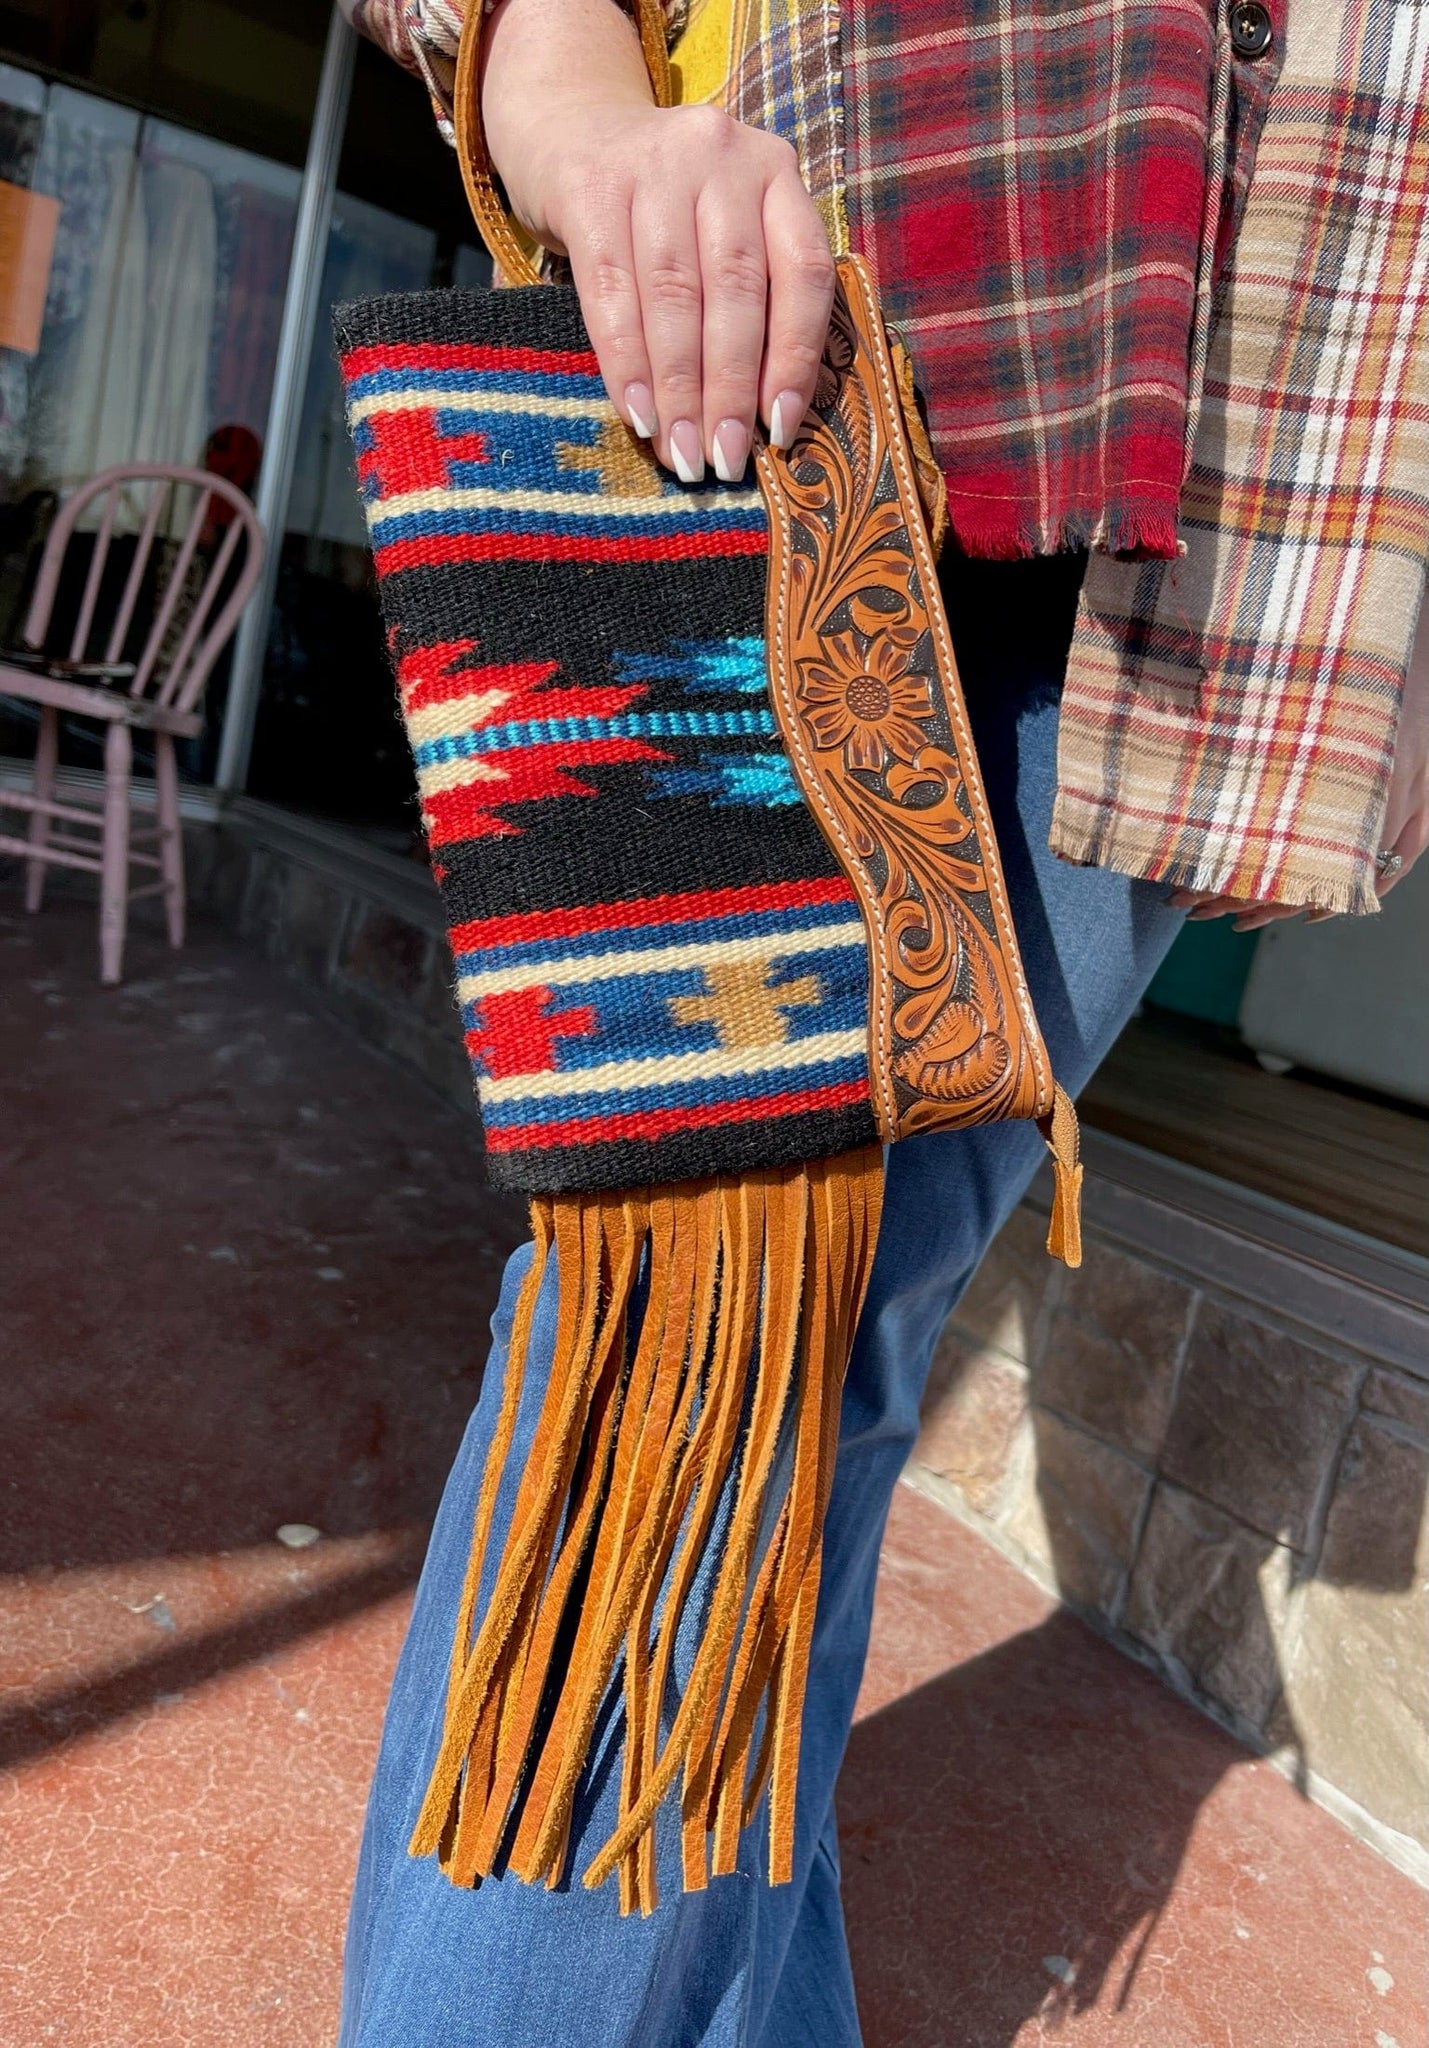 Saddle Blanket Clutch with Fringe The Sparkly Pig purses